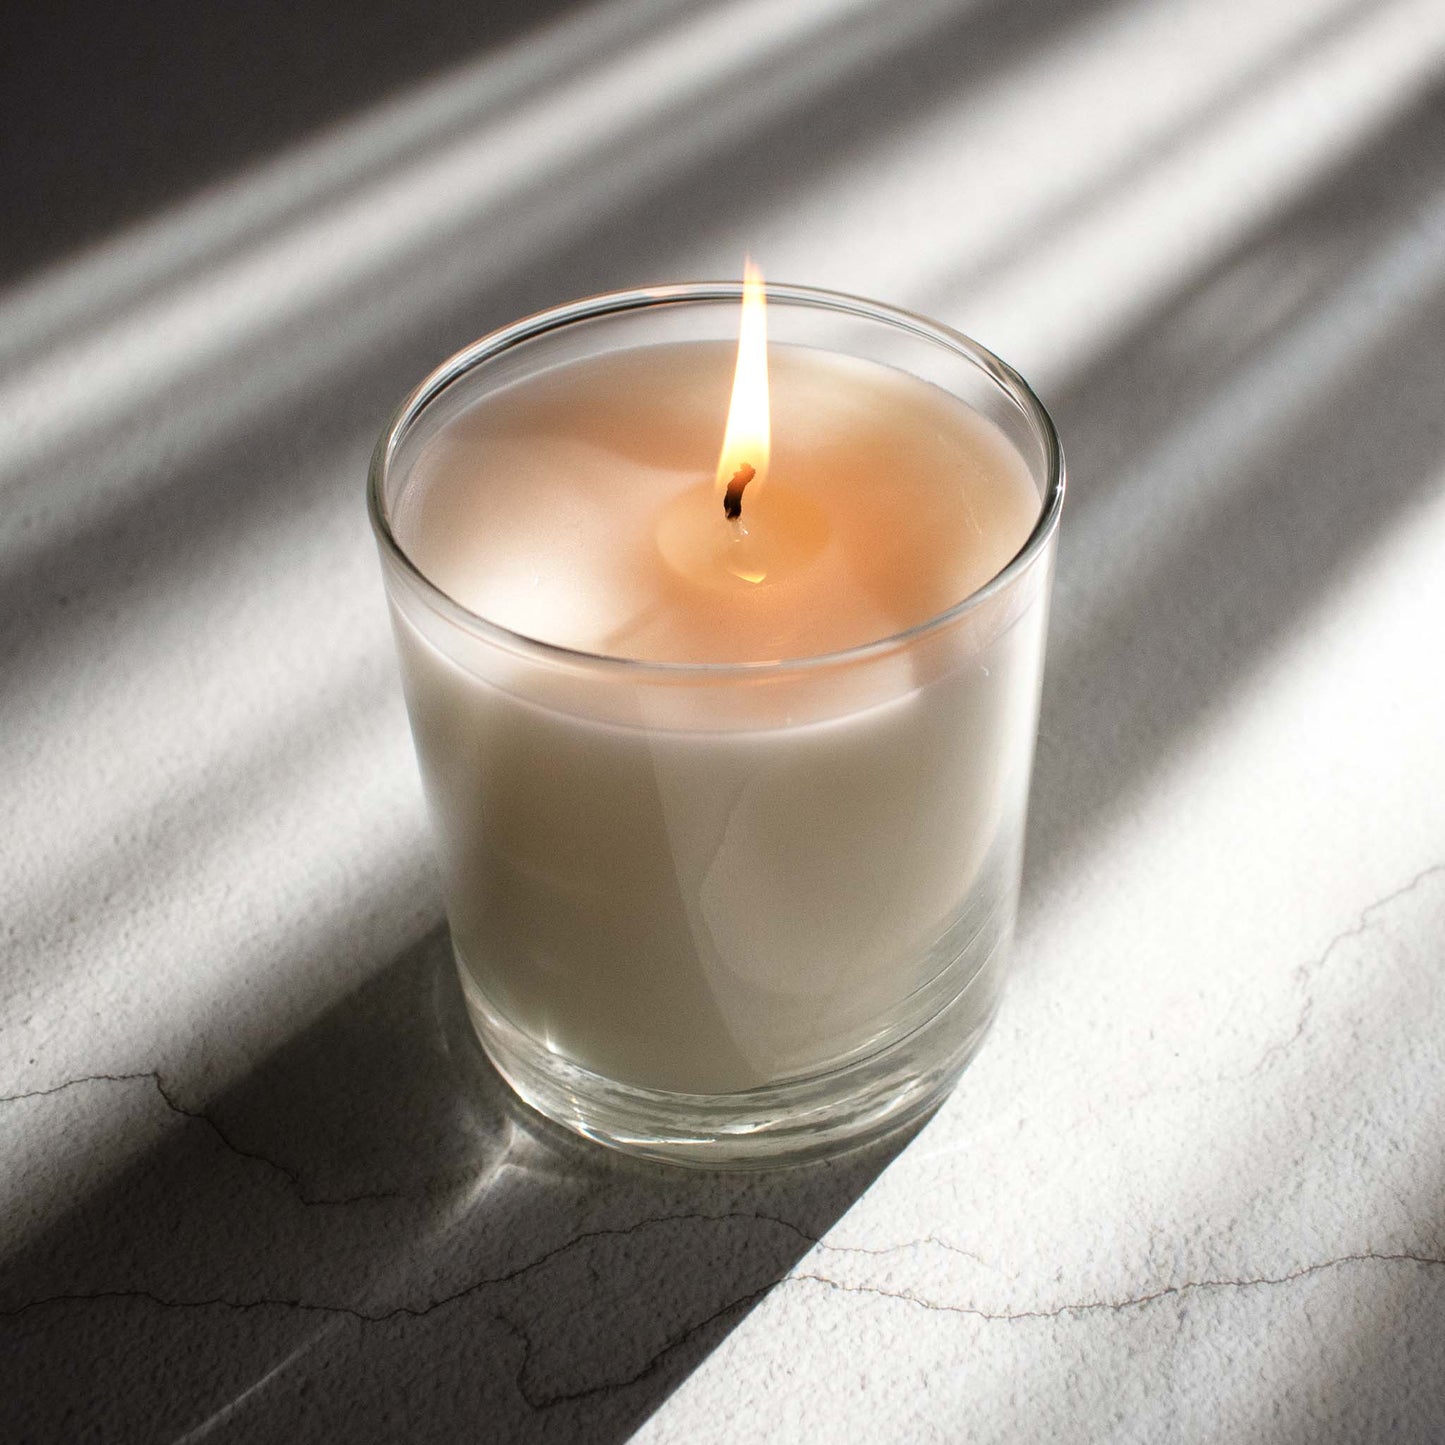 Burning scented soy blend wax candle on limestone table with sunrays.